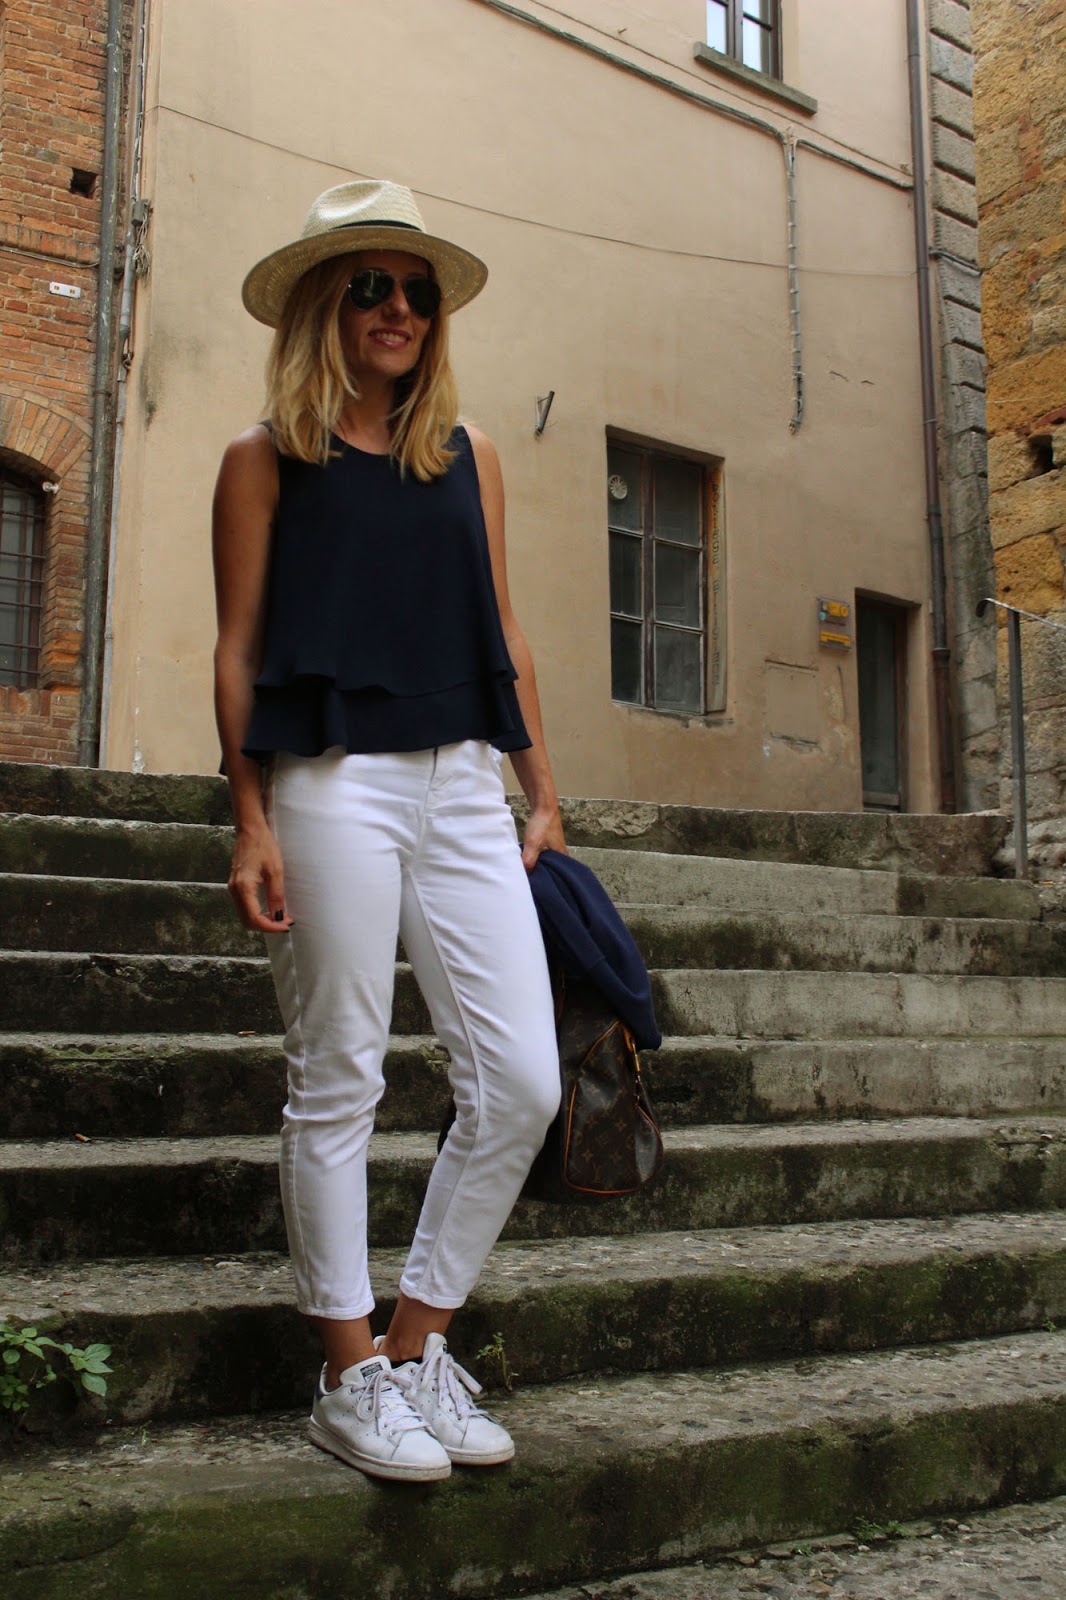 Eniwhere Fashion - Volterra - Blue and white outfit